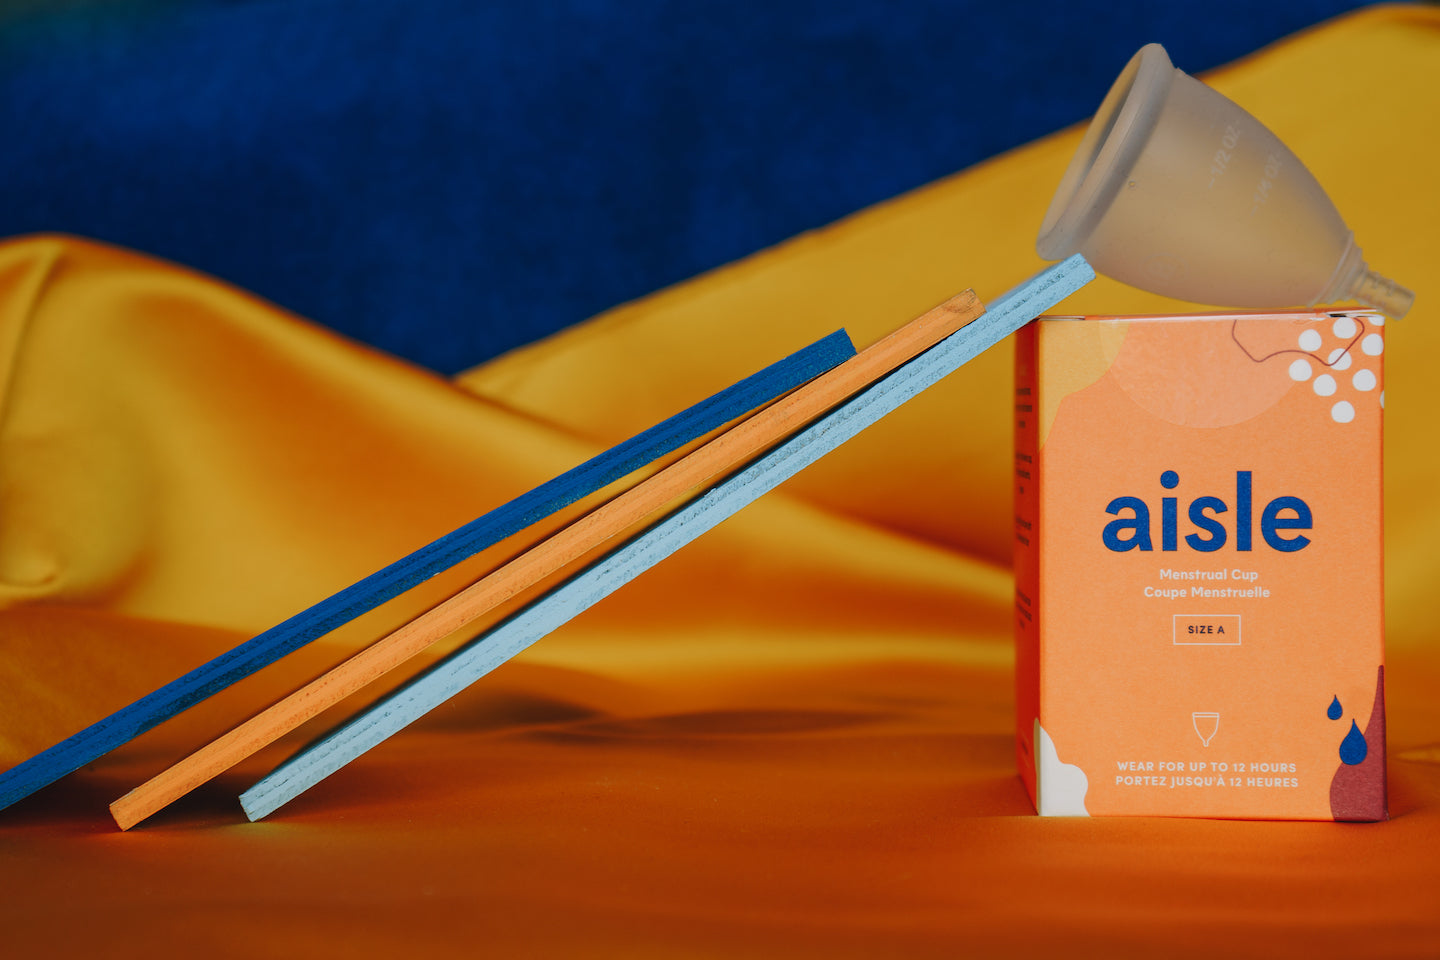 An Aisle menstrual cup sits on top of its box. There are 3 thin rectangular pieces of wood leaning up against the cup box.